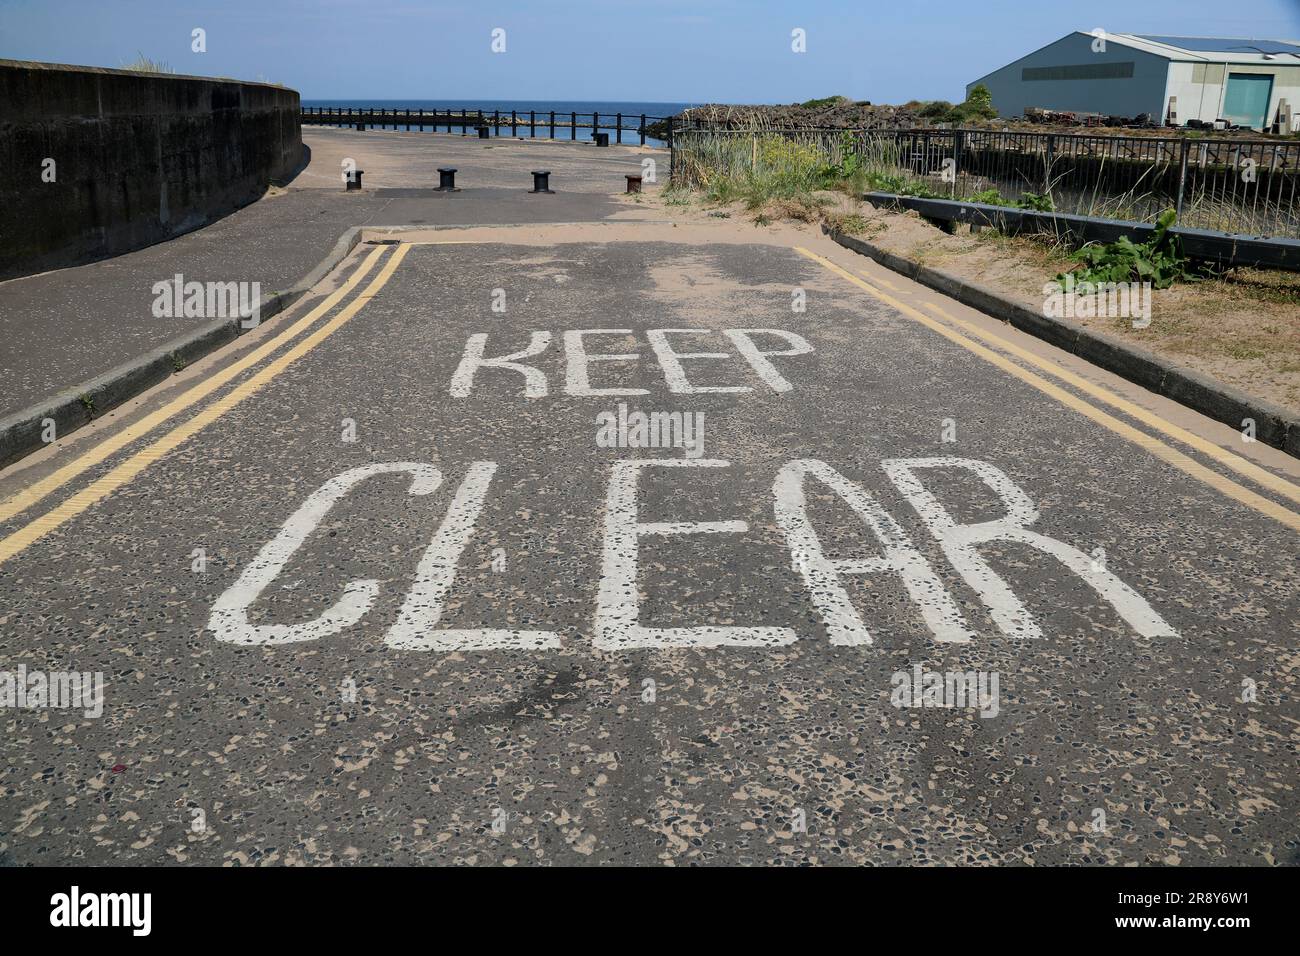 Keep clear painted road markings at a coastal jetty entrance Stock Photo